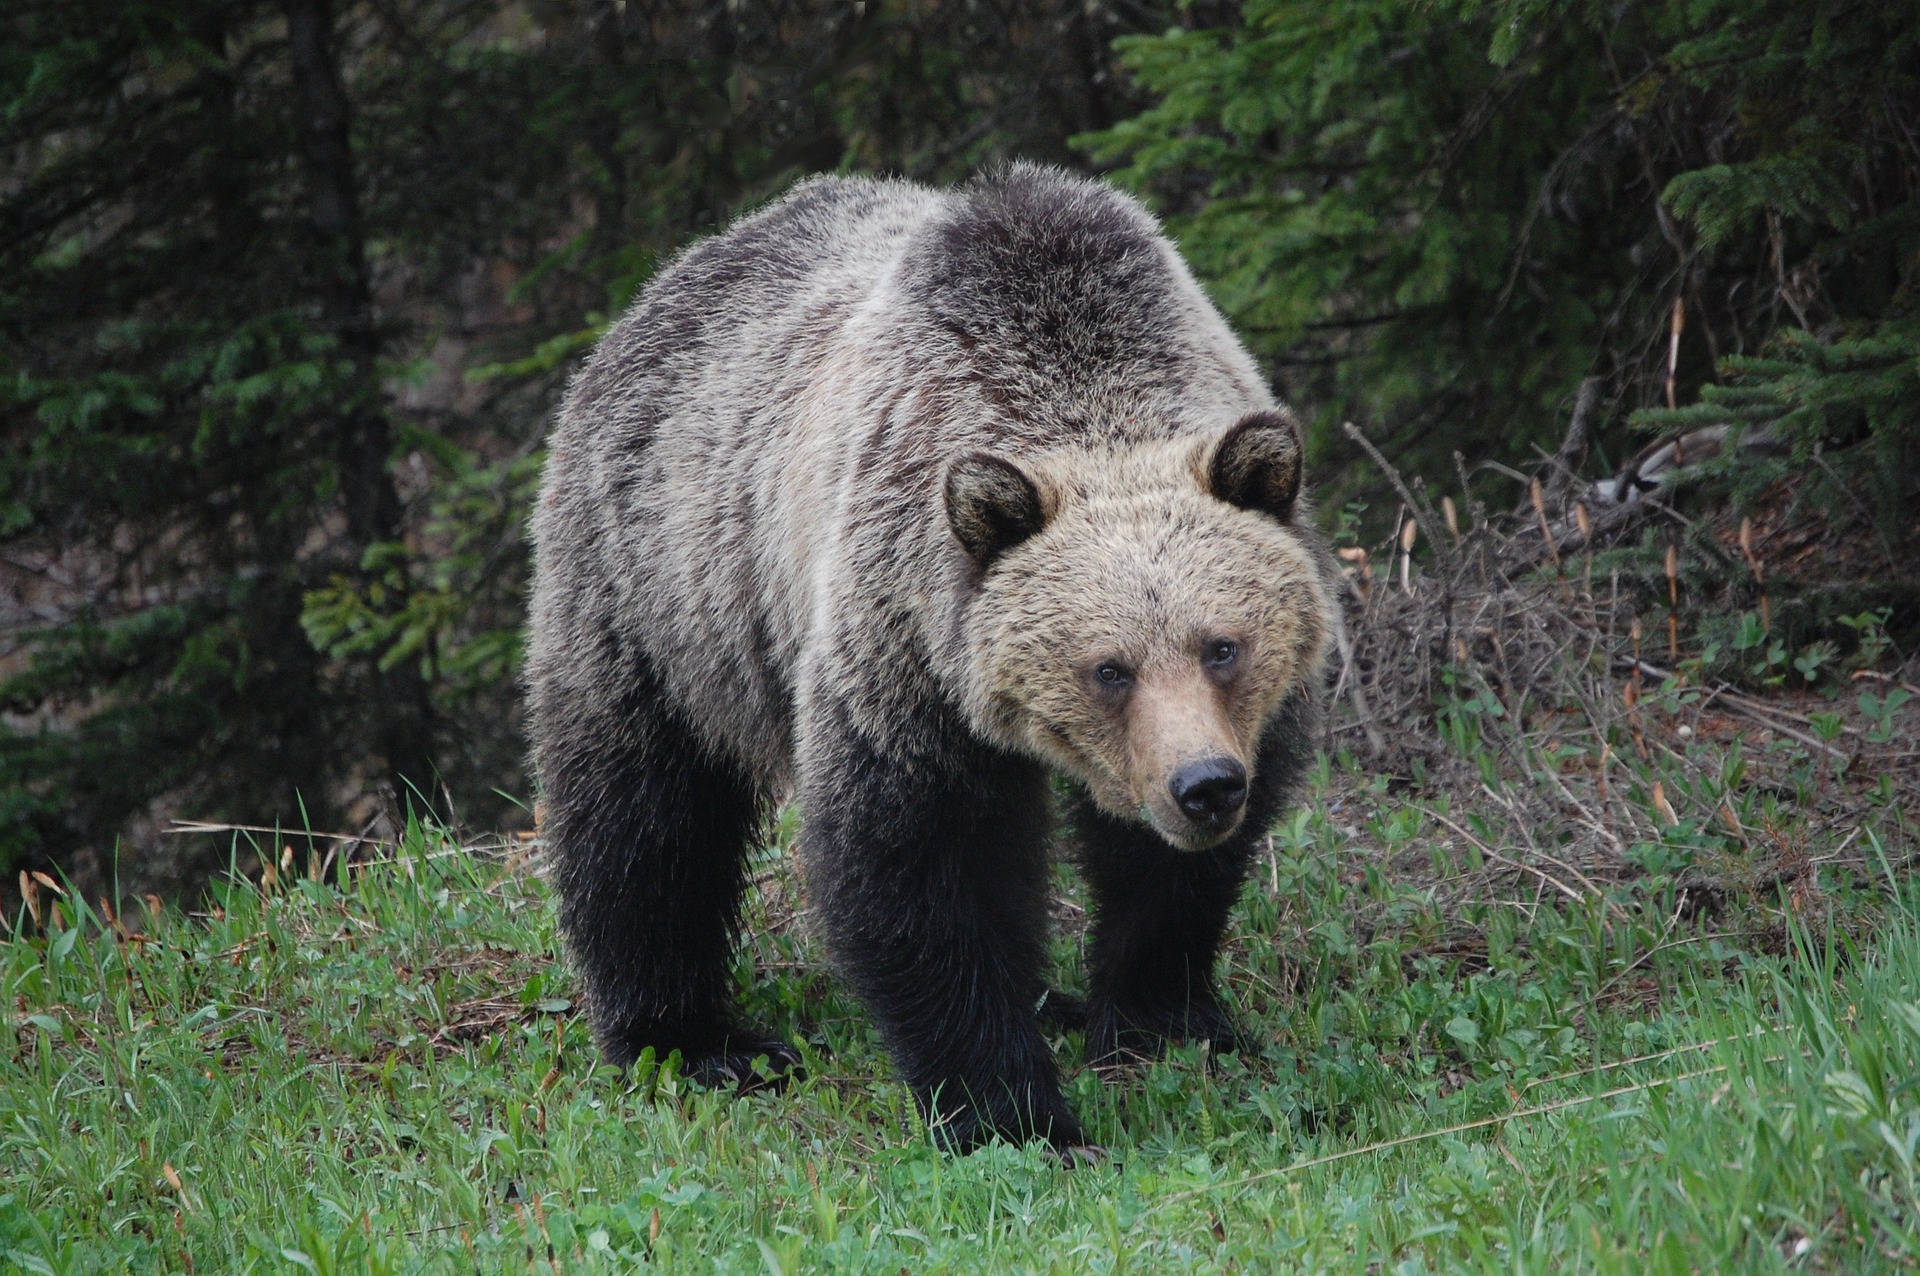 Grizzly bear attack is suspected in the death of an Alberta woman.